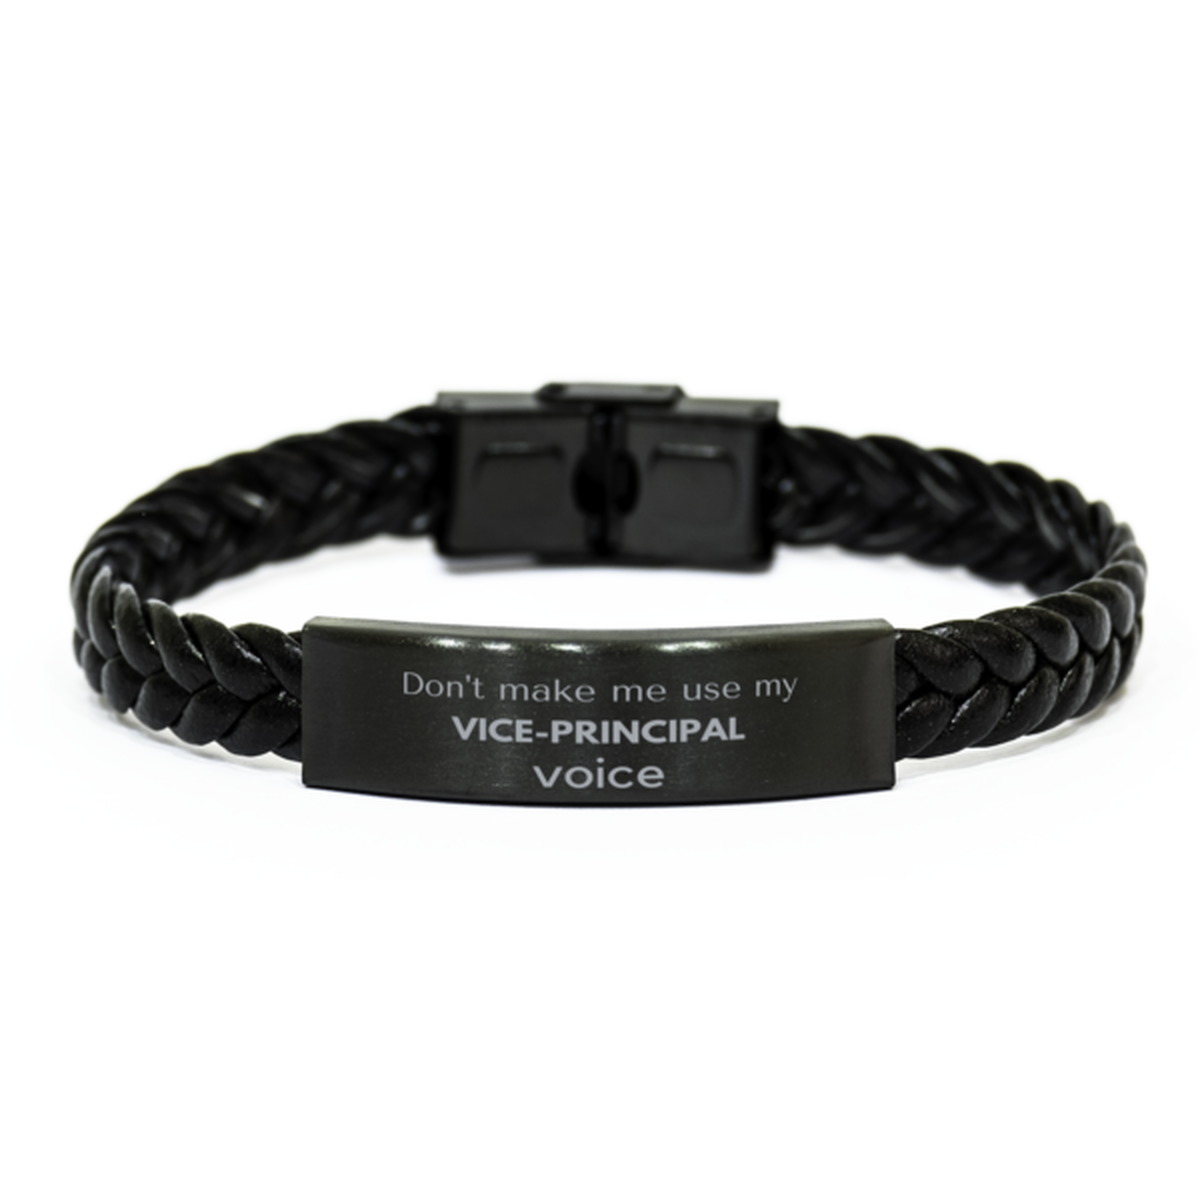 Don't make me use my Vice-principal voice, Sarcasm Vice-principal Gifts, Christmas Vice-principal Braided Leather Bracelet Birthday Unique Gifts For Vice-principal Coworkers, Men, Women, Colleague, Friends